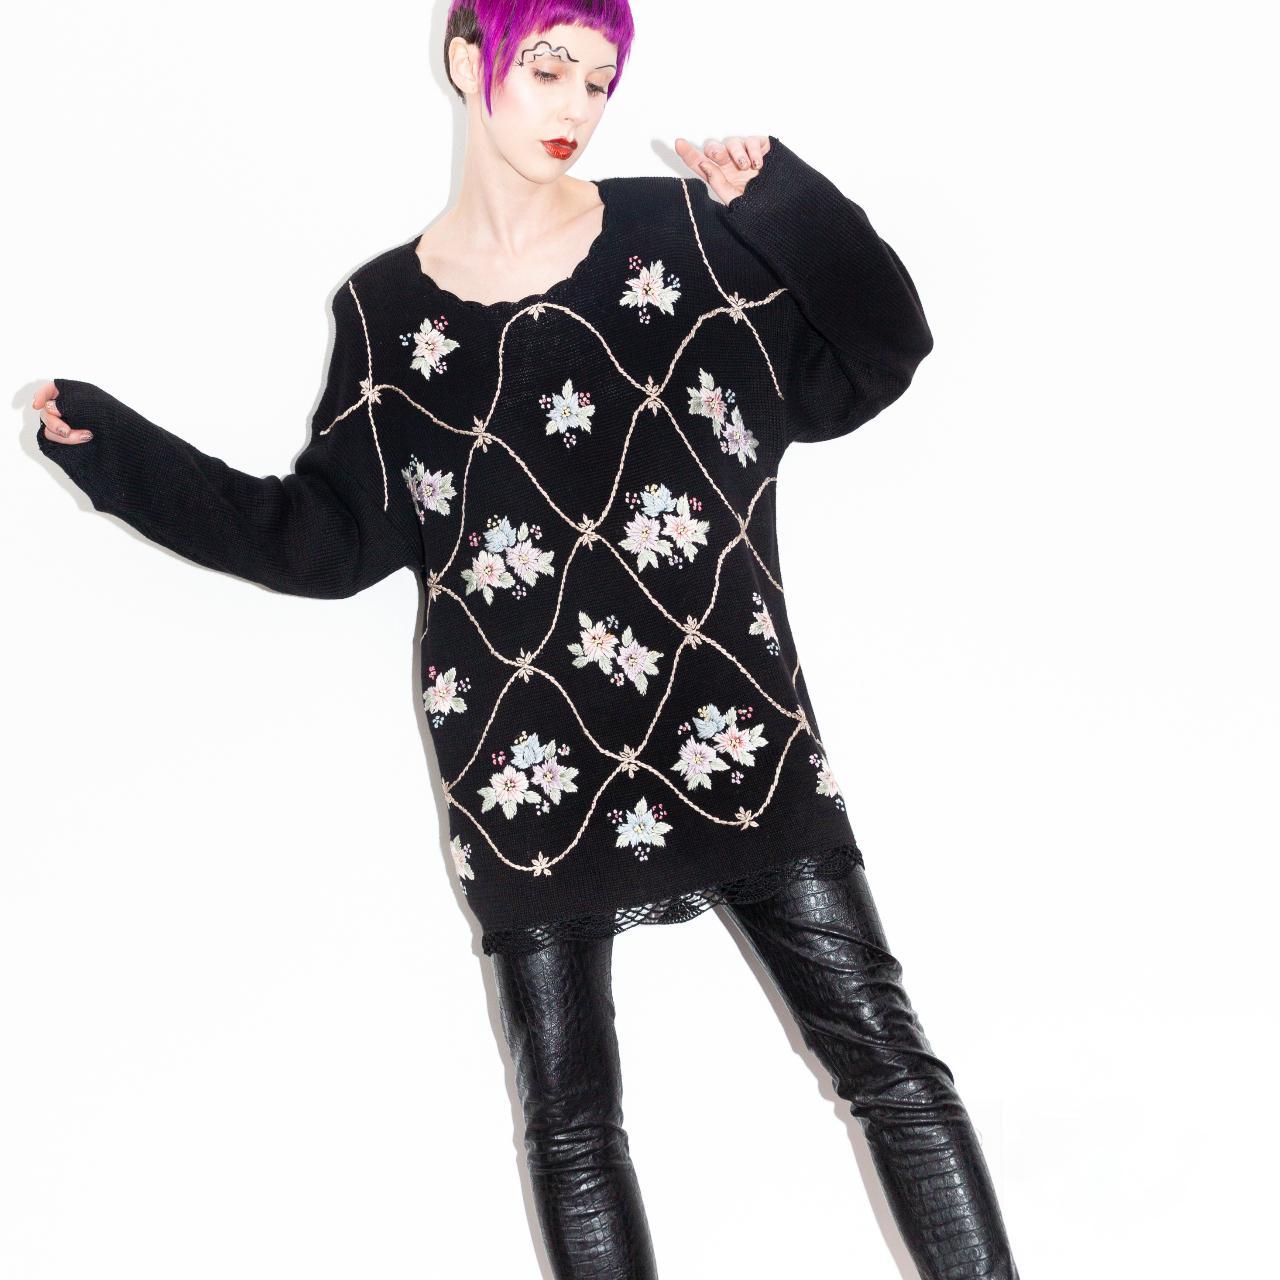 Product Image 2 - The most darling knit black